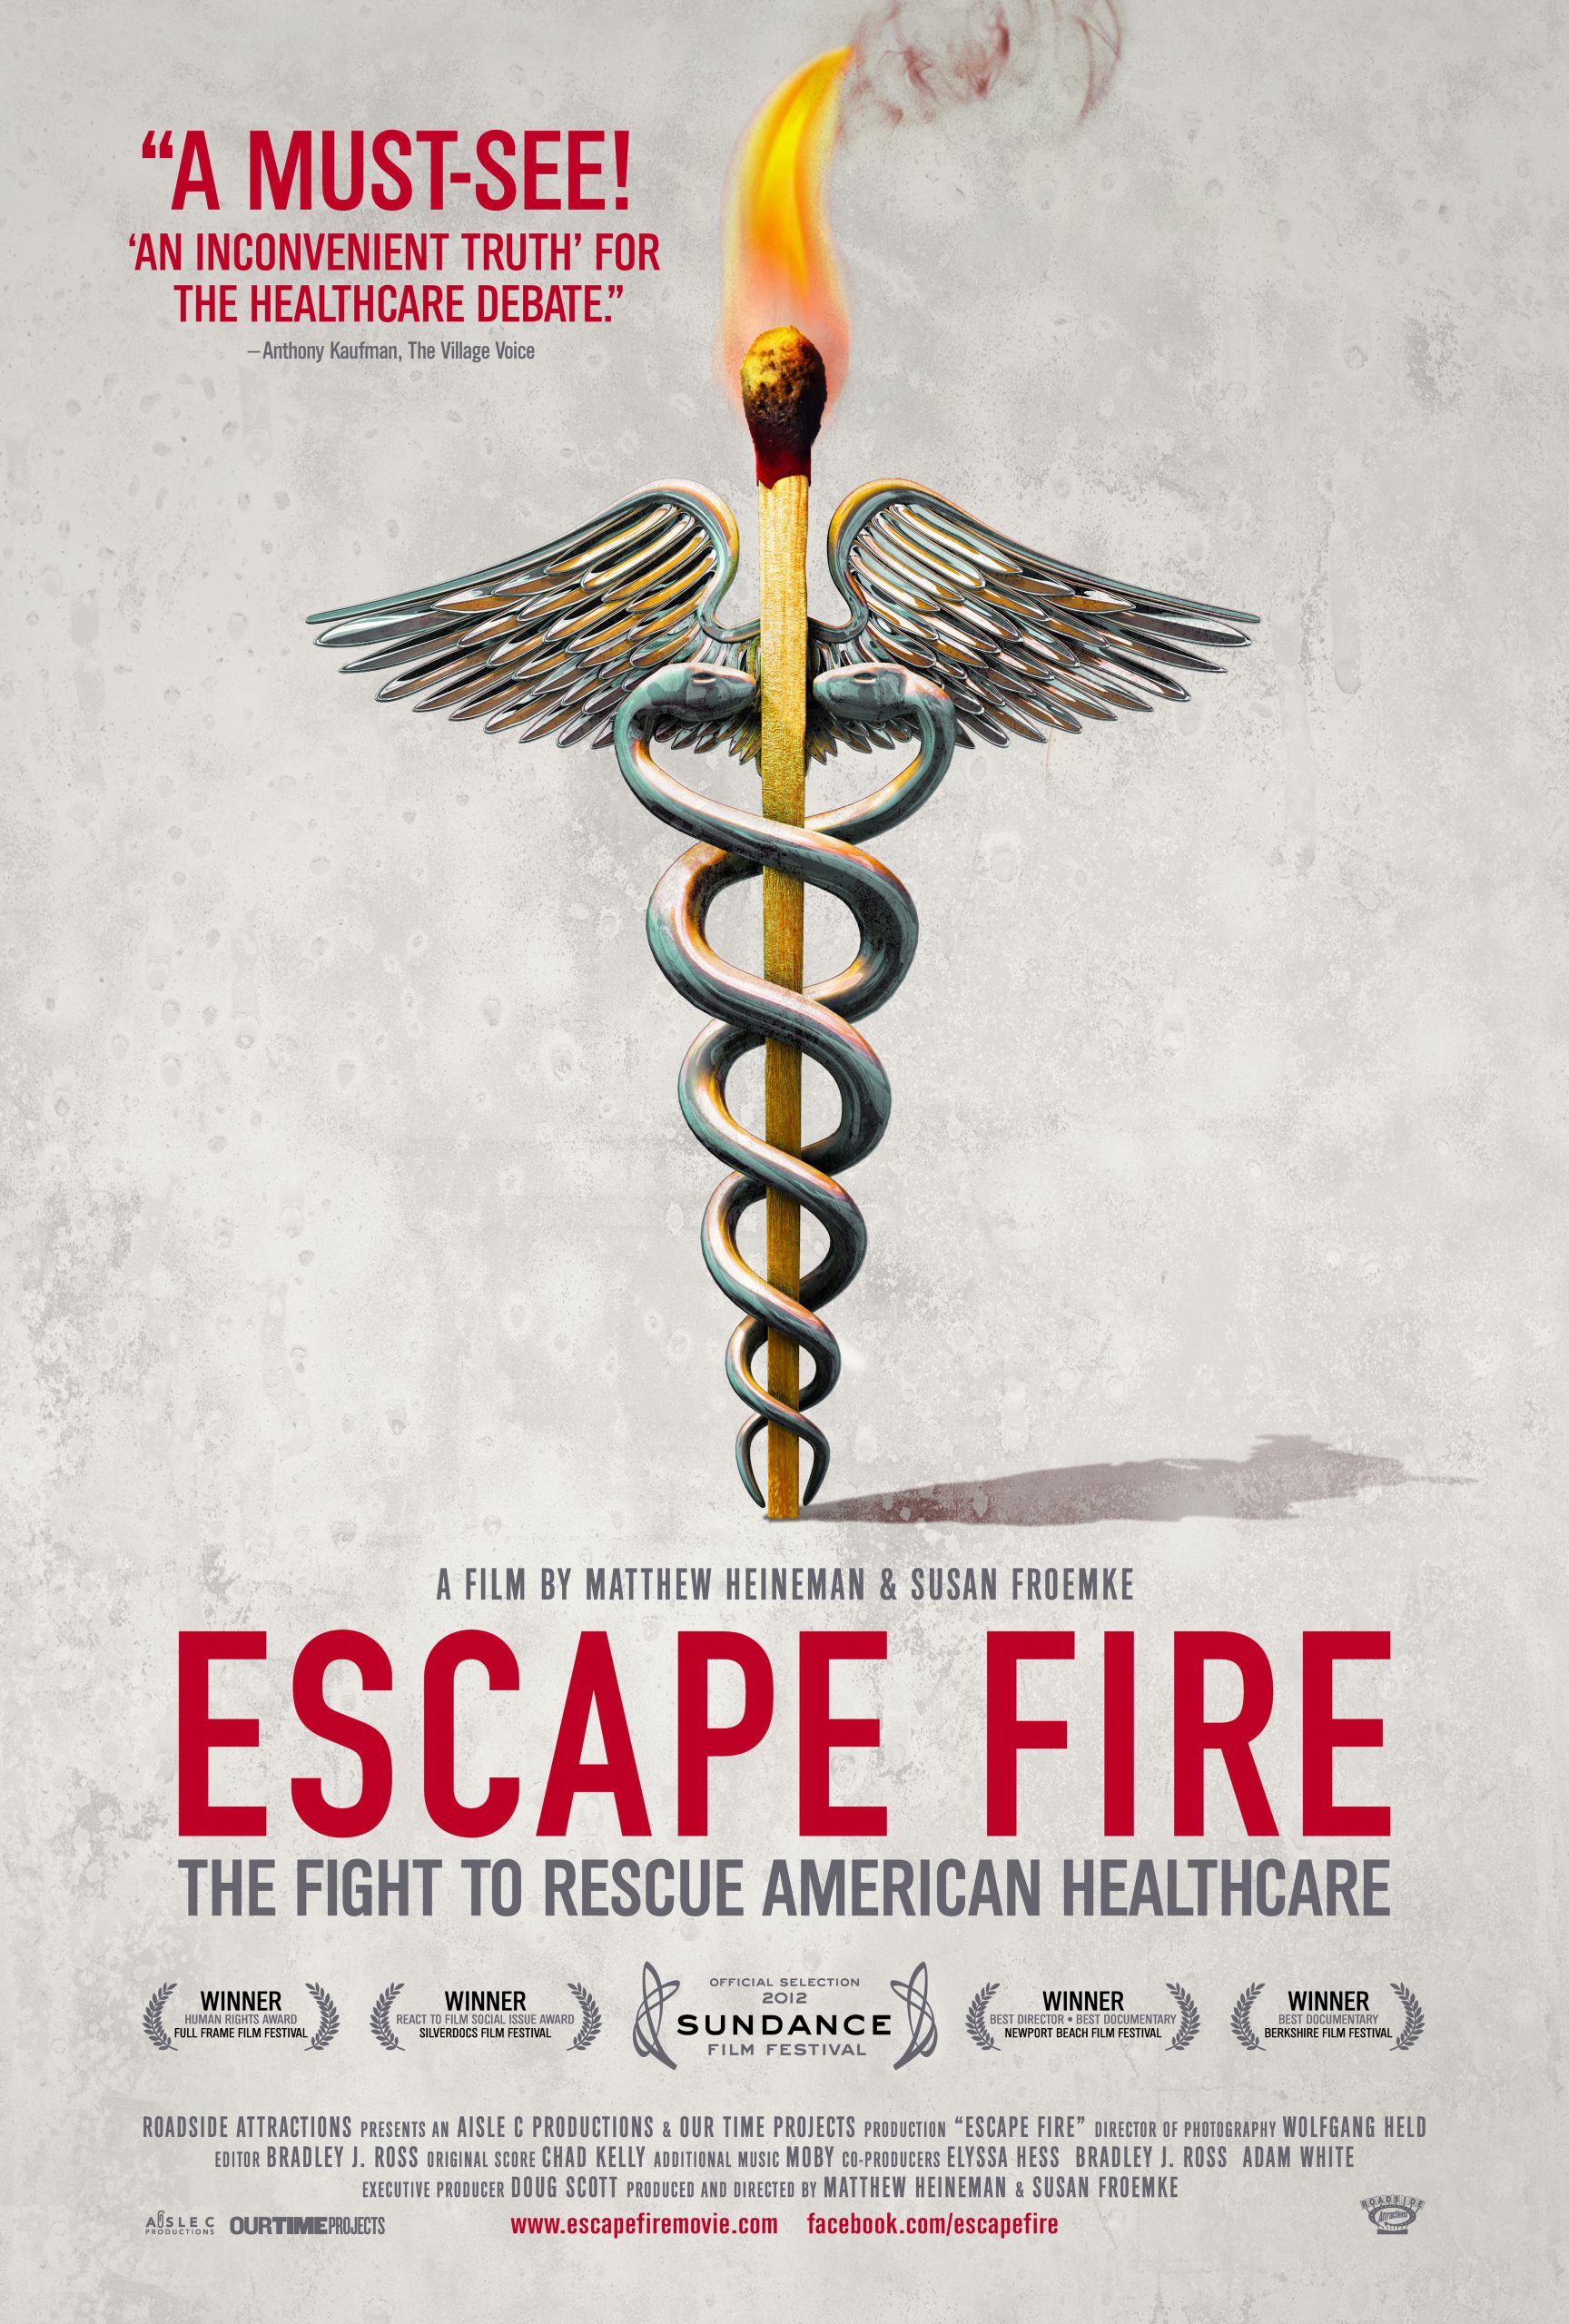 Free: Watch CNN’s Film “Escape Fire” Which Exposes a Broken Corrupt Medical Industry & What we can do